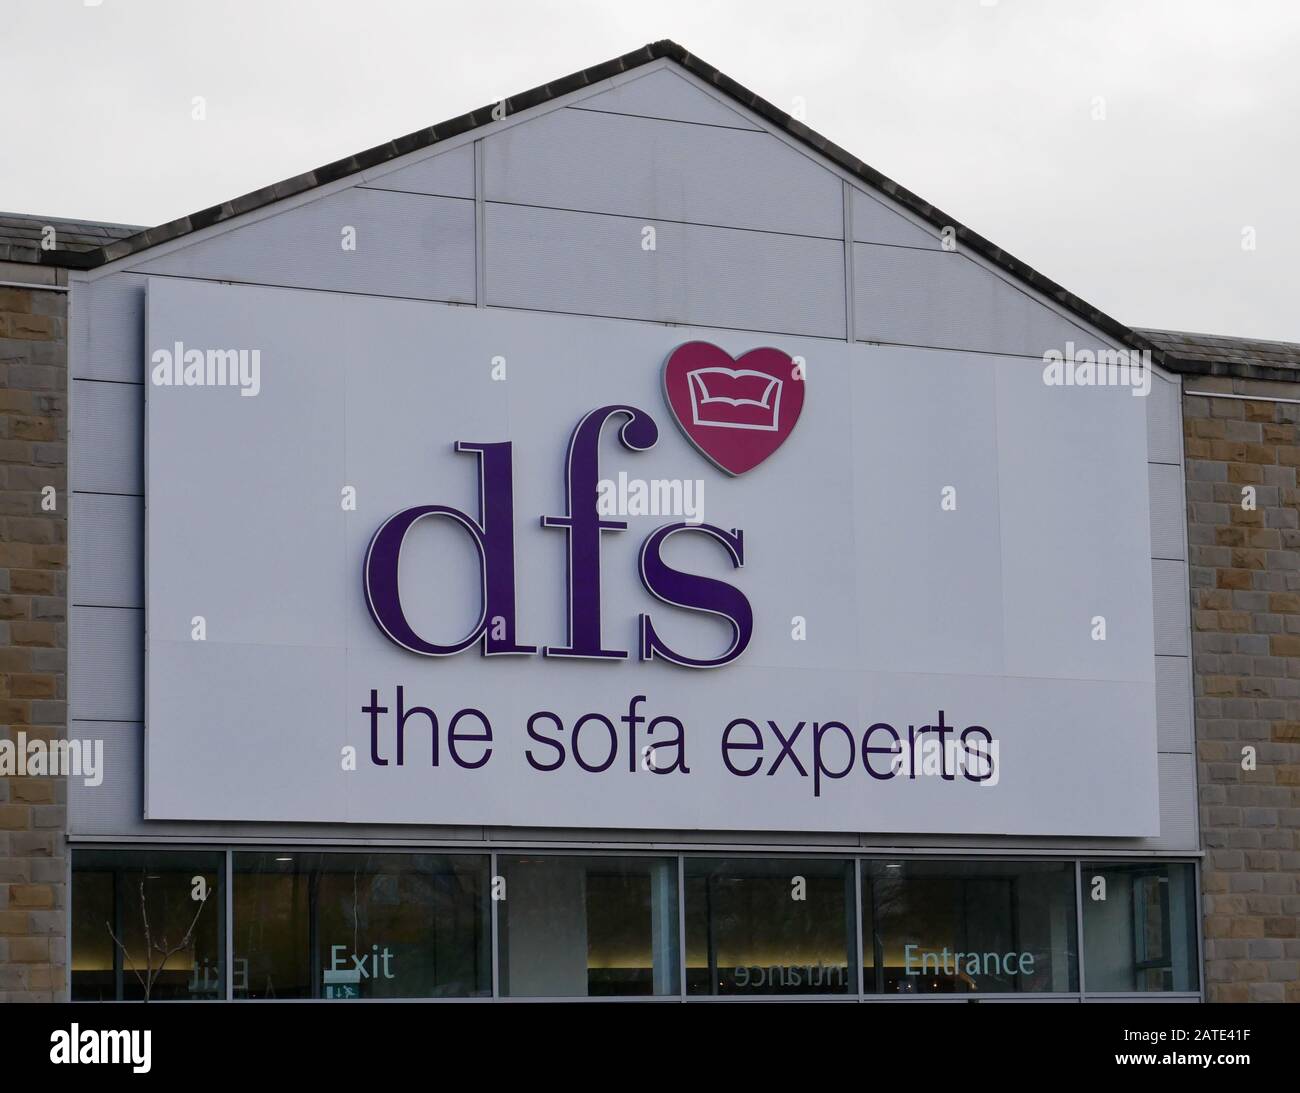 The shop front sign in white with blue writing and small red heart of DFS The Sofa Experts in Huddersfield Yorkshire England Stock Photo